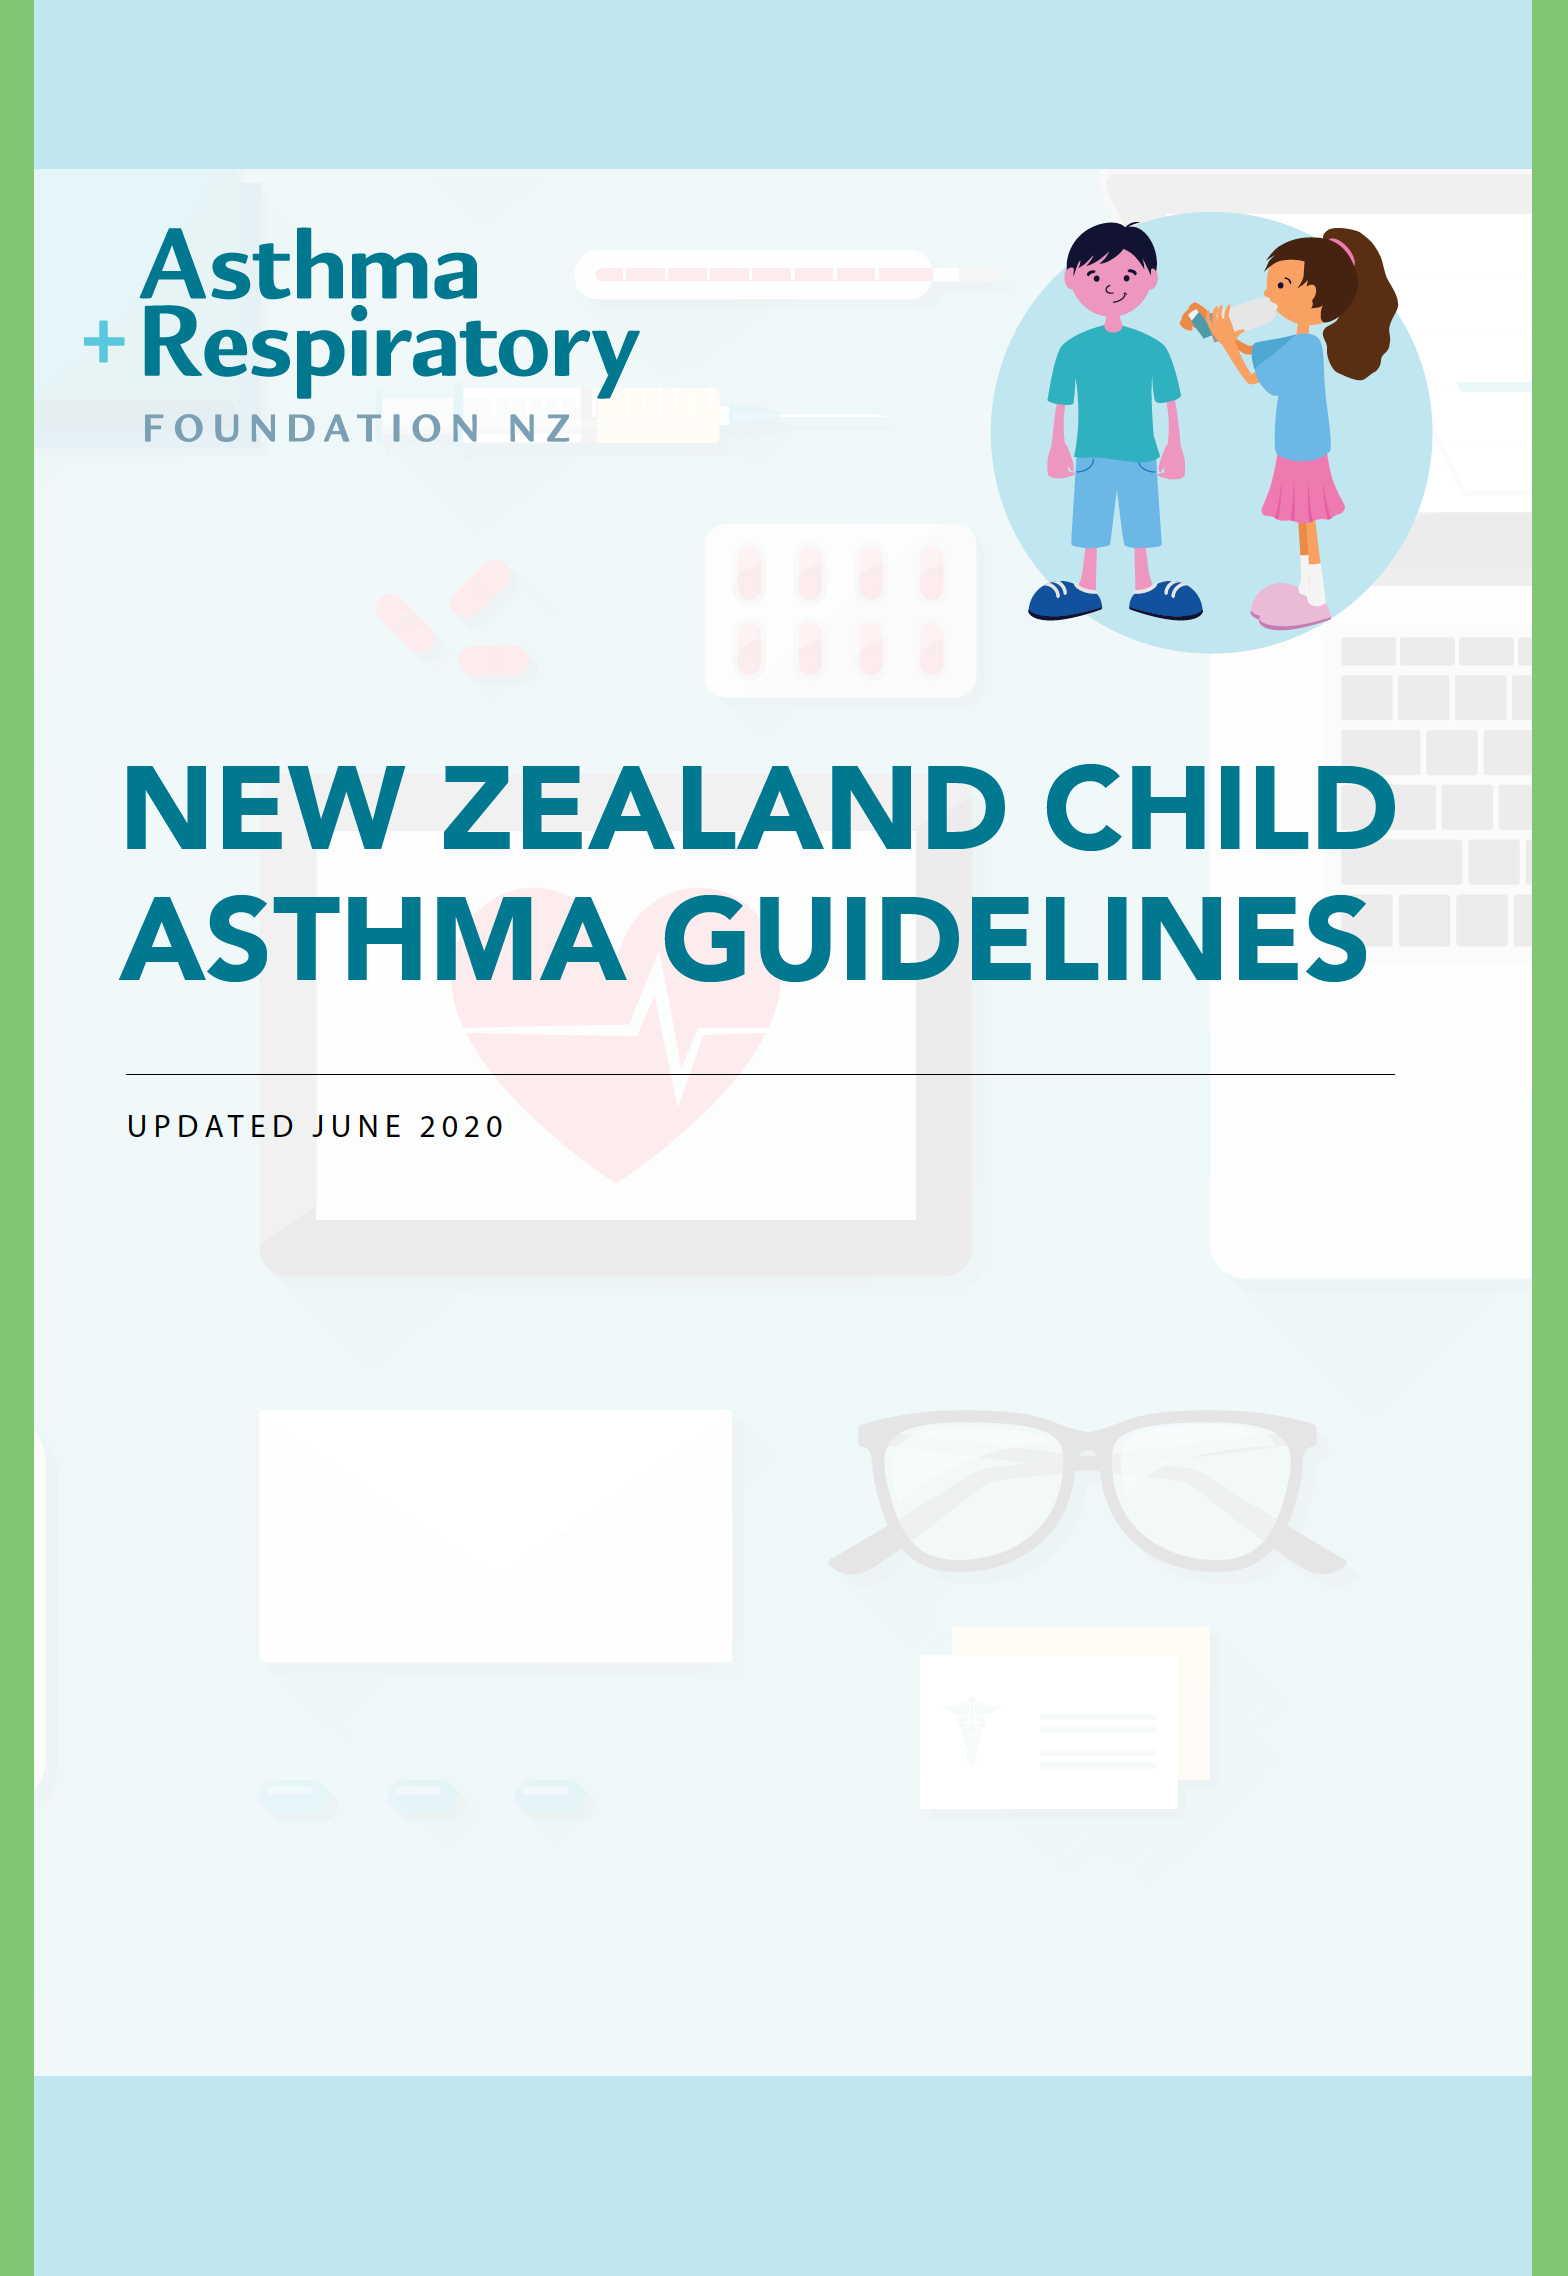 NZ Child Asthma Guidelines